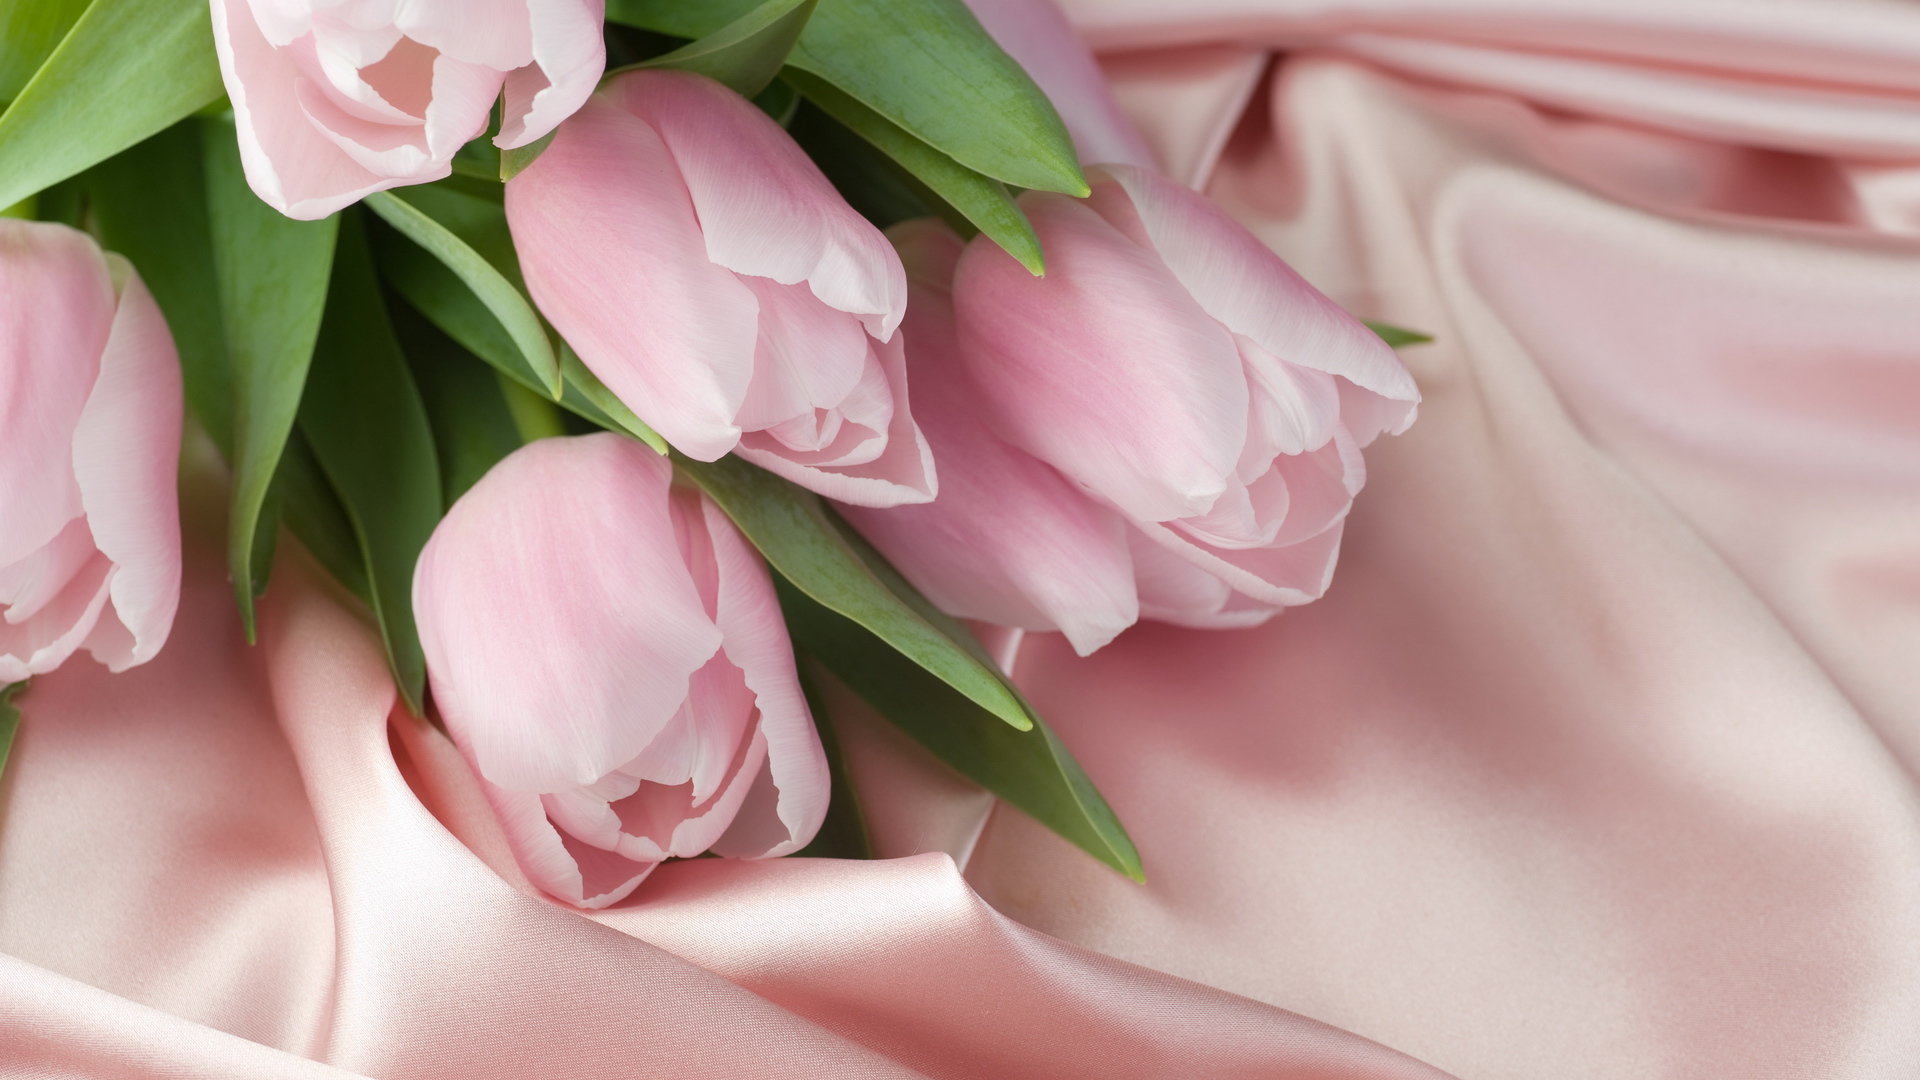 Holidays___International_Womens_Day_Tulips_and_Silk_on_March_8_057386_